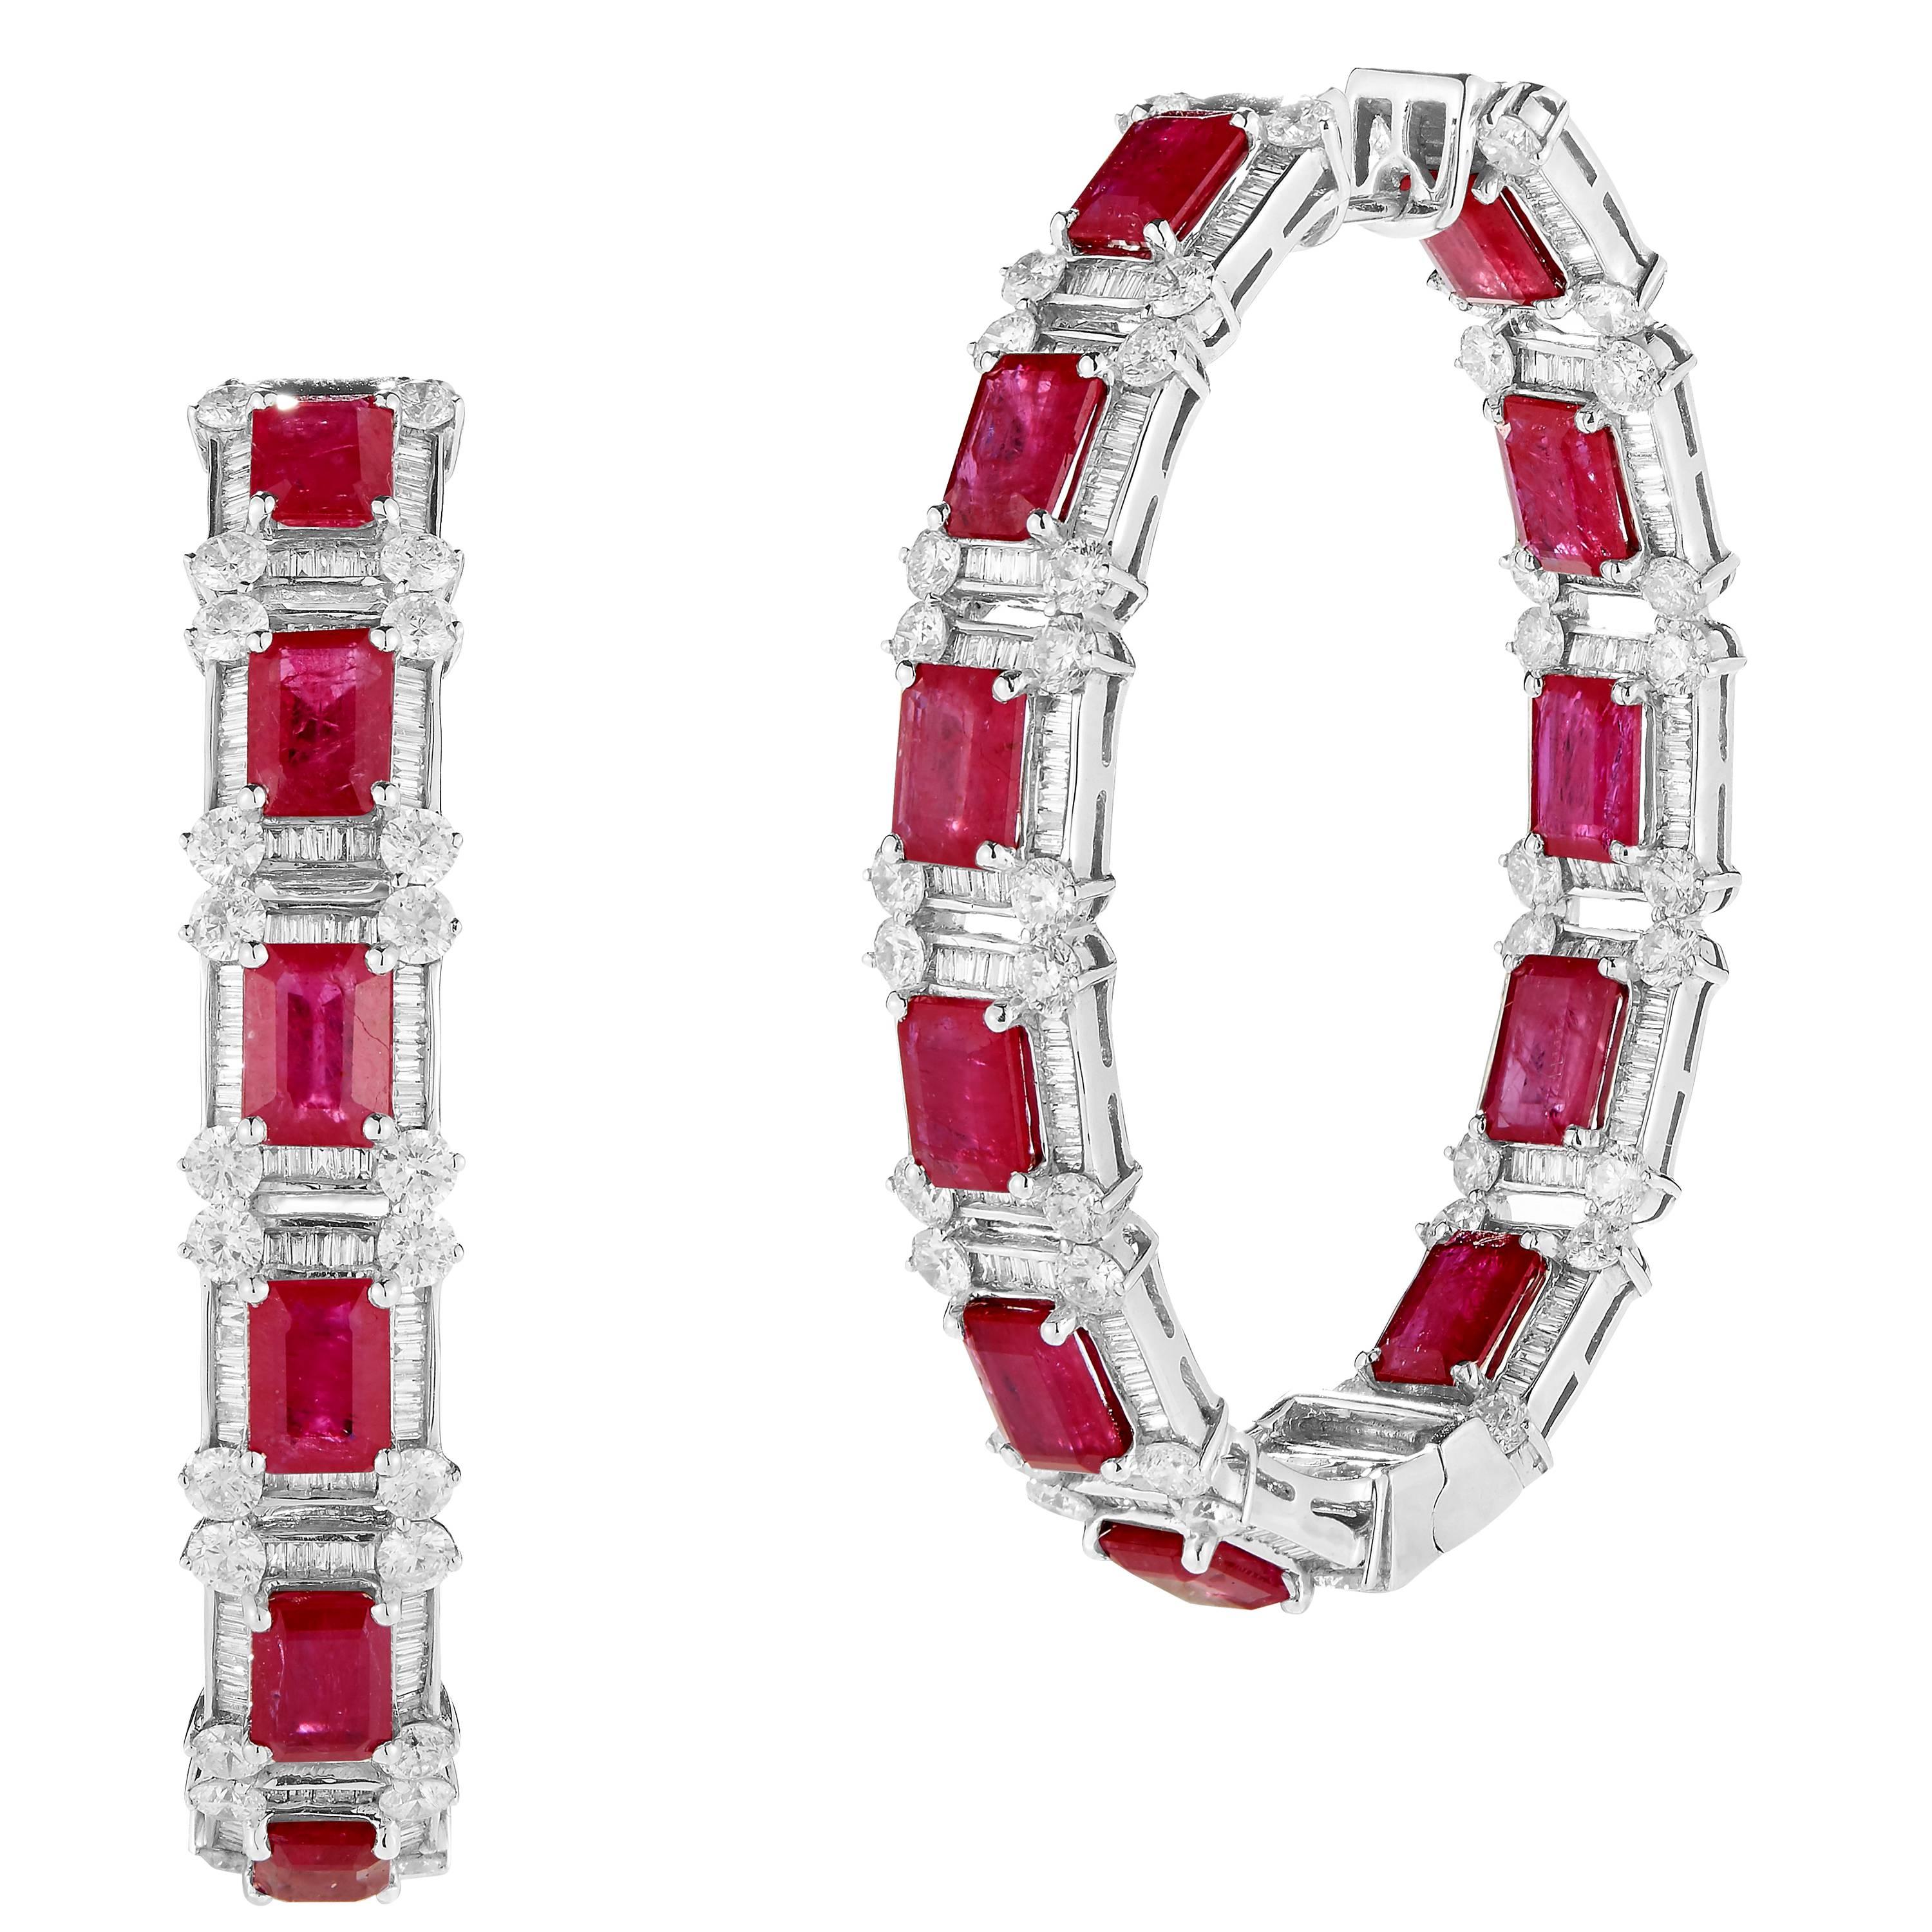 Magnificent 18 Karat White Gold Diamond and Ruby Earring